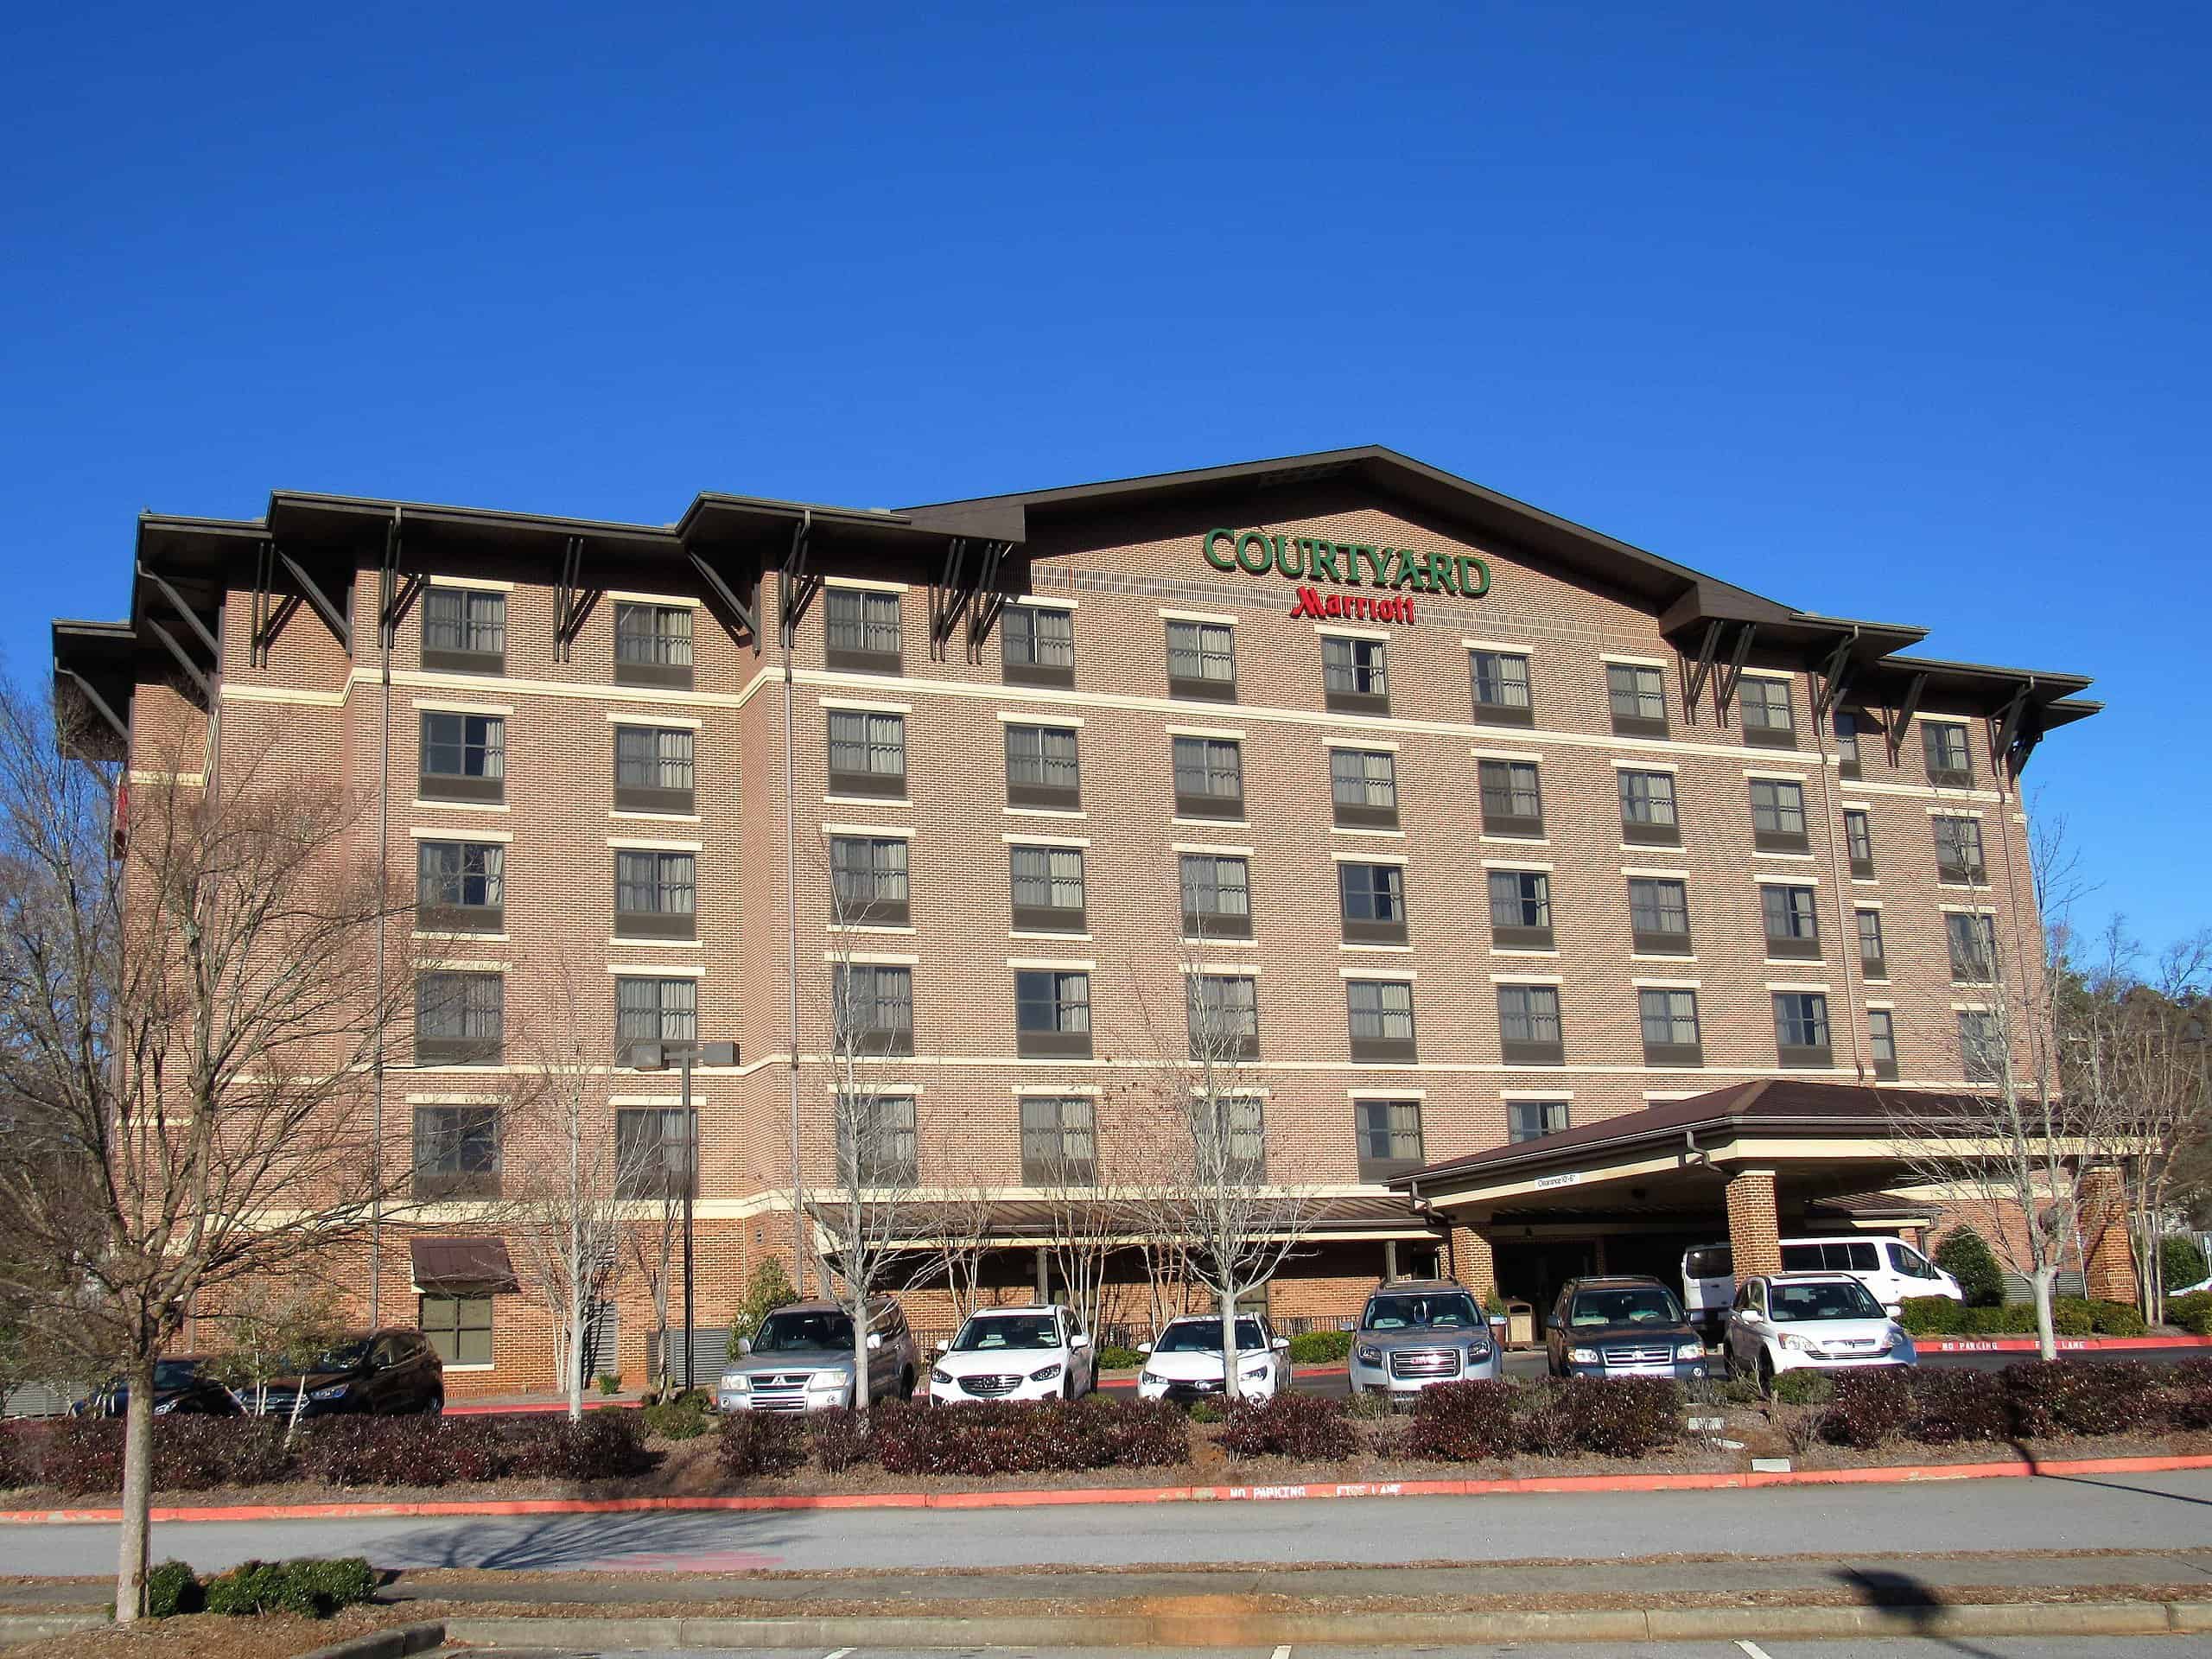 The Courtyard by Marriott in Clemson, South Carolina.